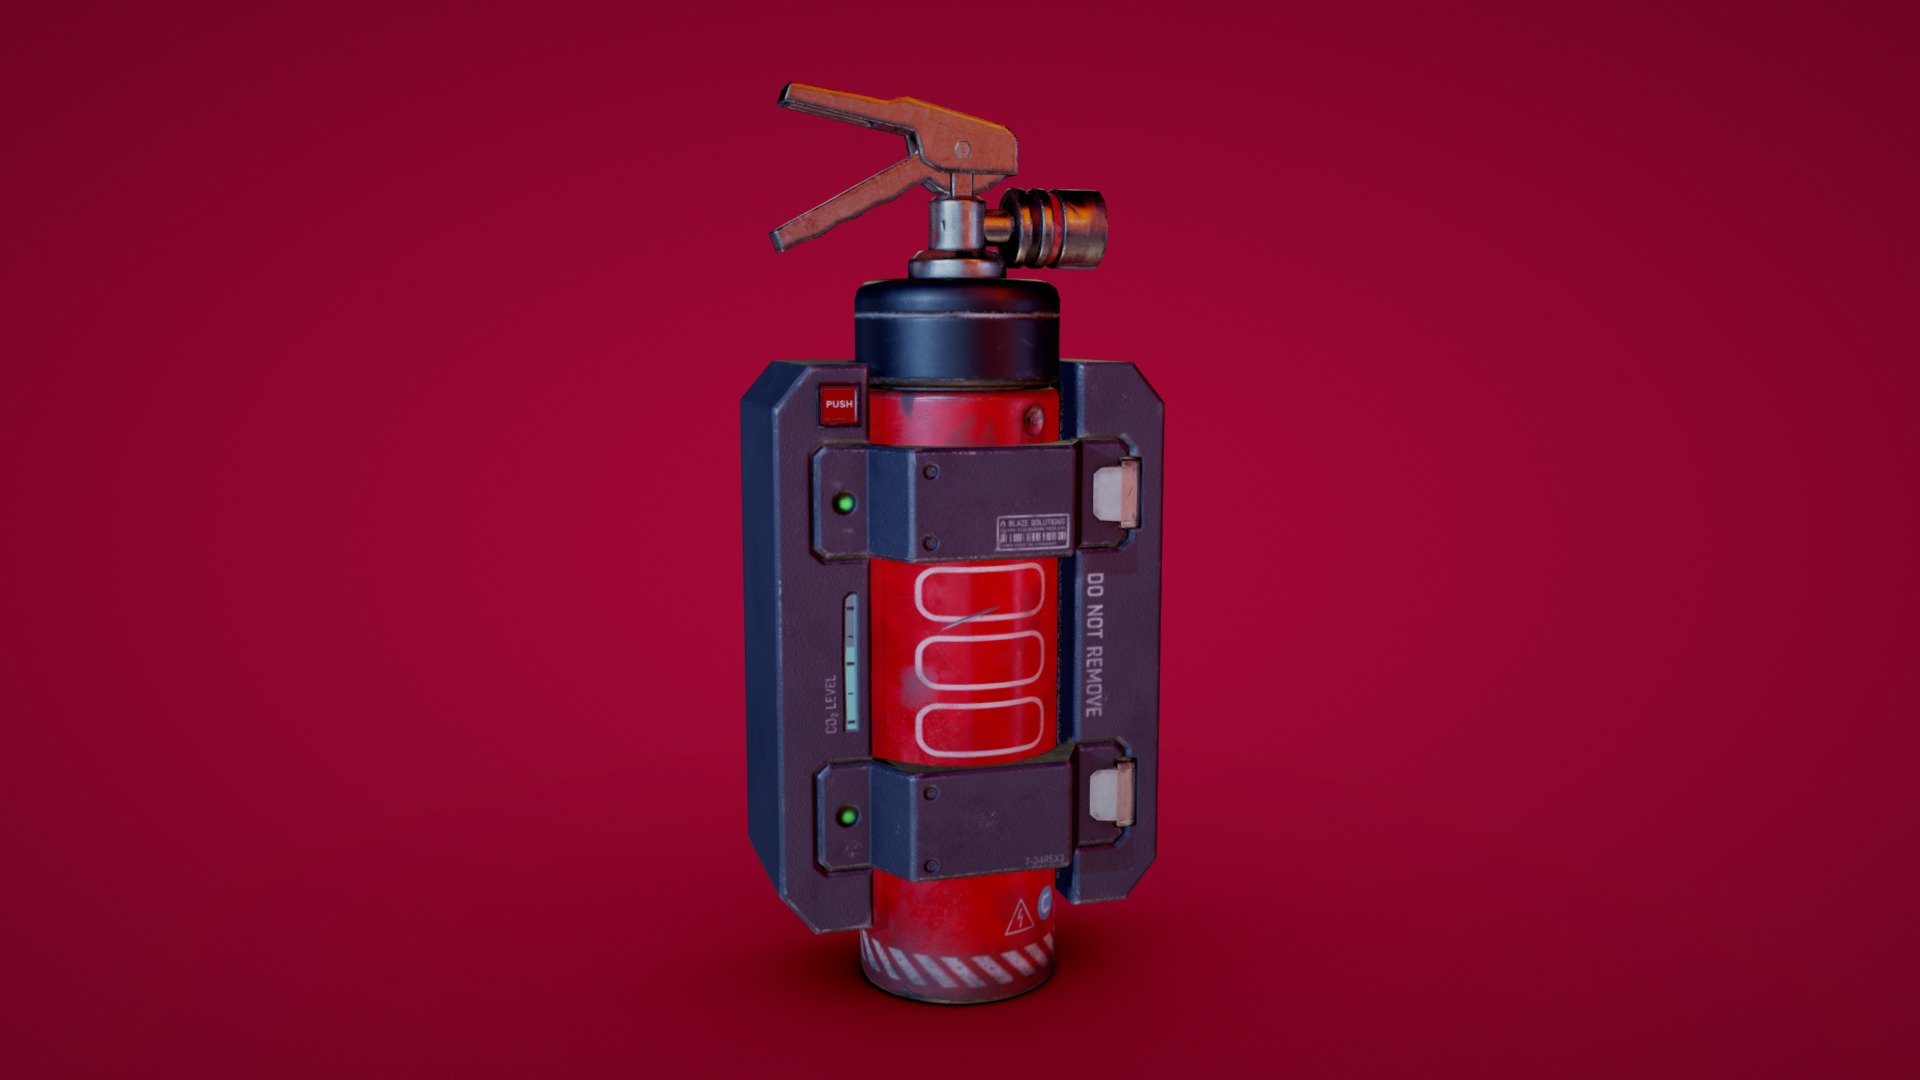 Take this wall-mounted fire extinguisher with you on all your space-faring journeys. 

Low-poly and game-engine ready. Modeled in real-world scale in Maya. Textured in Substance Painter. 

Handle, arms and button ready for rigging and animation.

Seth Perlstein

Separate 4K (shown in viewport) and 2K PBR, Unreal and Unity texture sets include Base Color, Metalness, Roughness, Normal, Emissive and Occlusion. FBX and OBJ also included.

Refill CO2 after use.

KEY STATISTICS

Tris: 3,442

Quads: 1,824

Verts: 1,948

UVs: 2,871

Texture Sets: 1 (4K and 2K included)

4K Texel Density: 48.26

2K Texel Density: 24.13 - Sci-Fi Wall-Mounted Fire Extinguisher - Buy Royalty Free 3D model by Seth Perlstein (@sethperlstein) 3d model